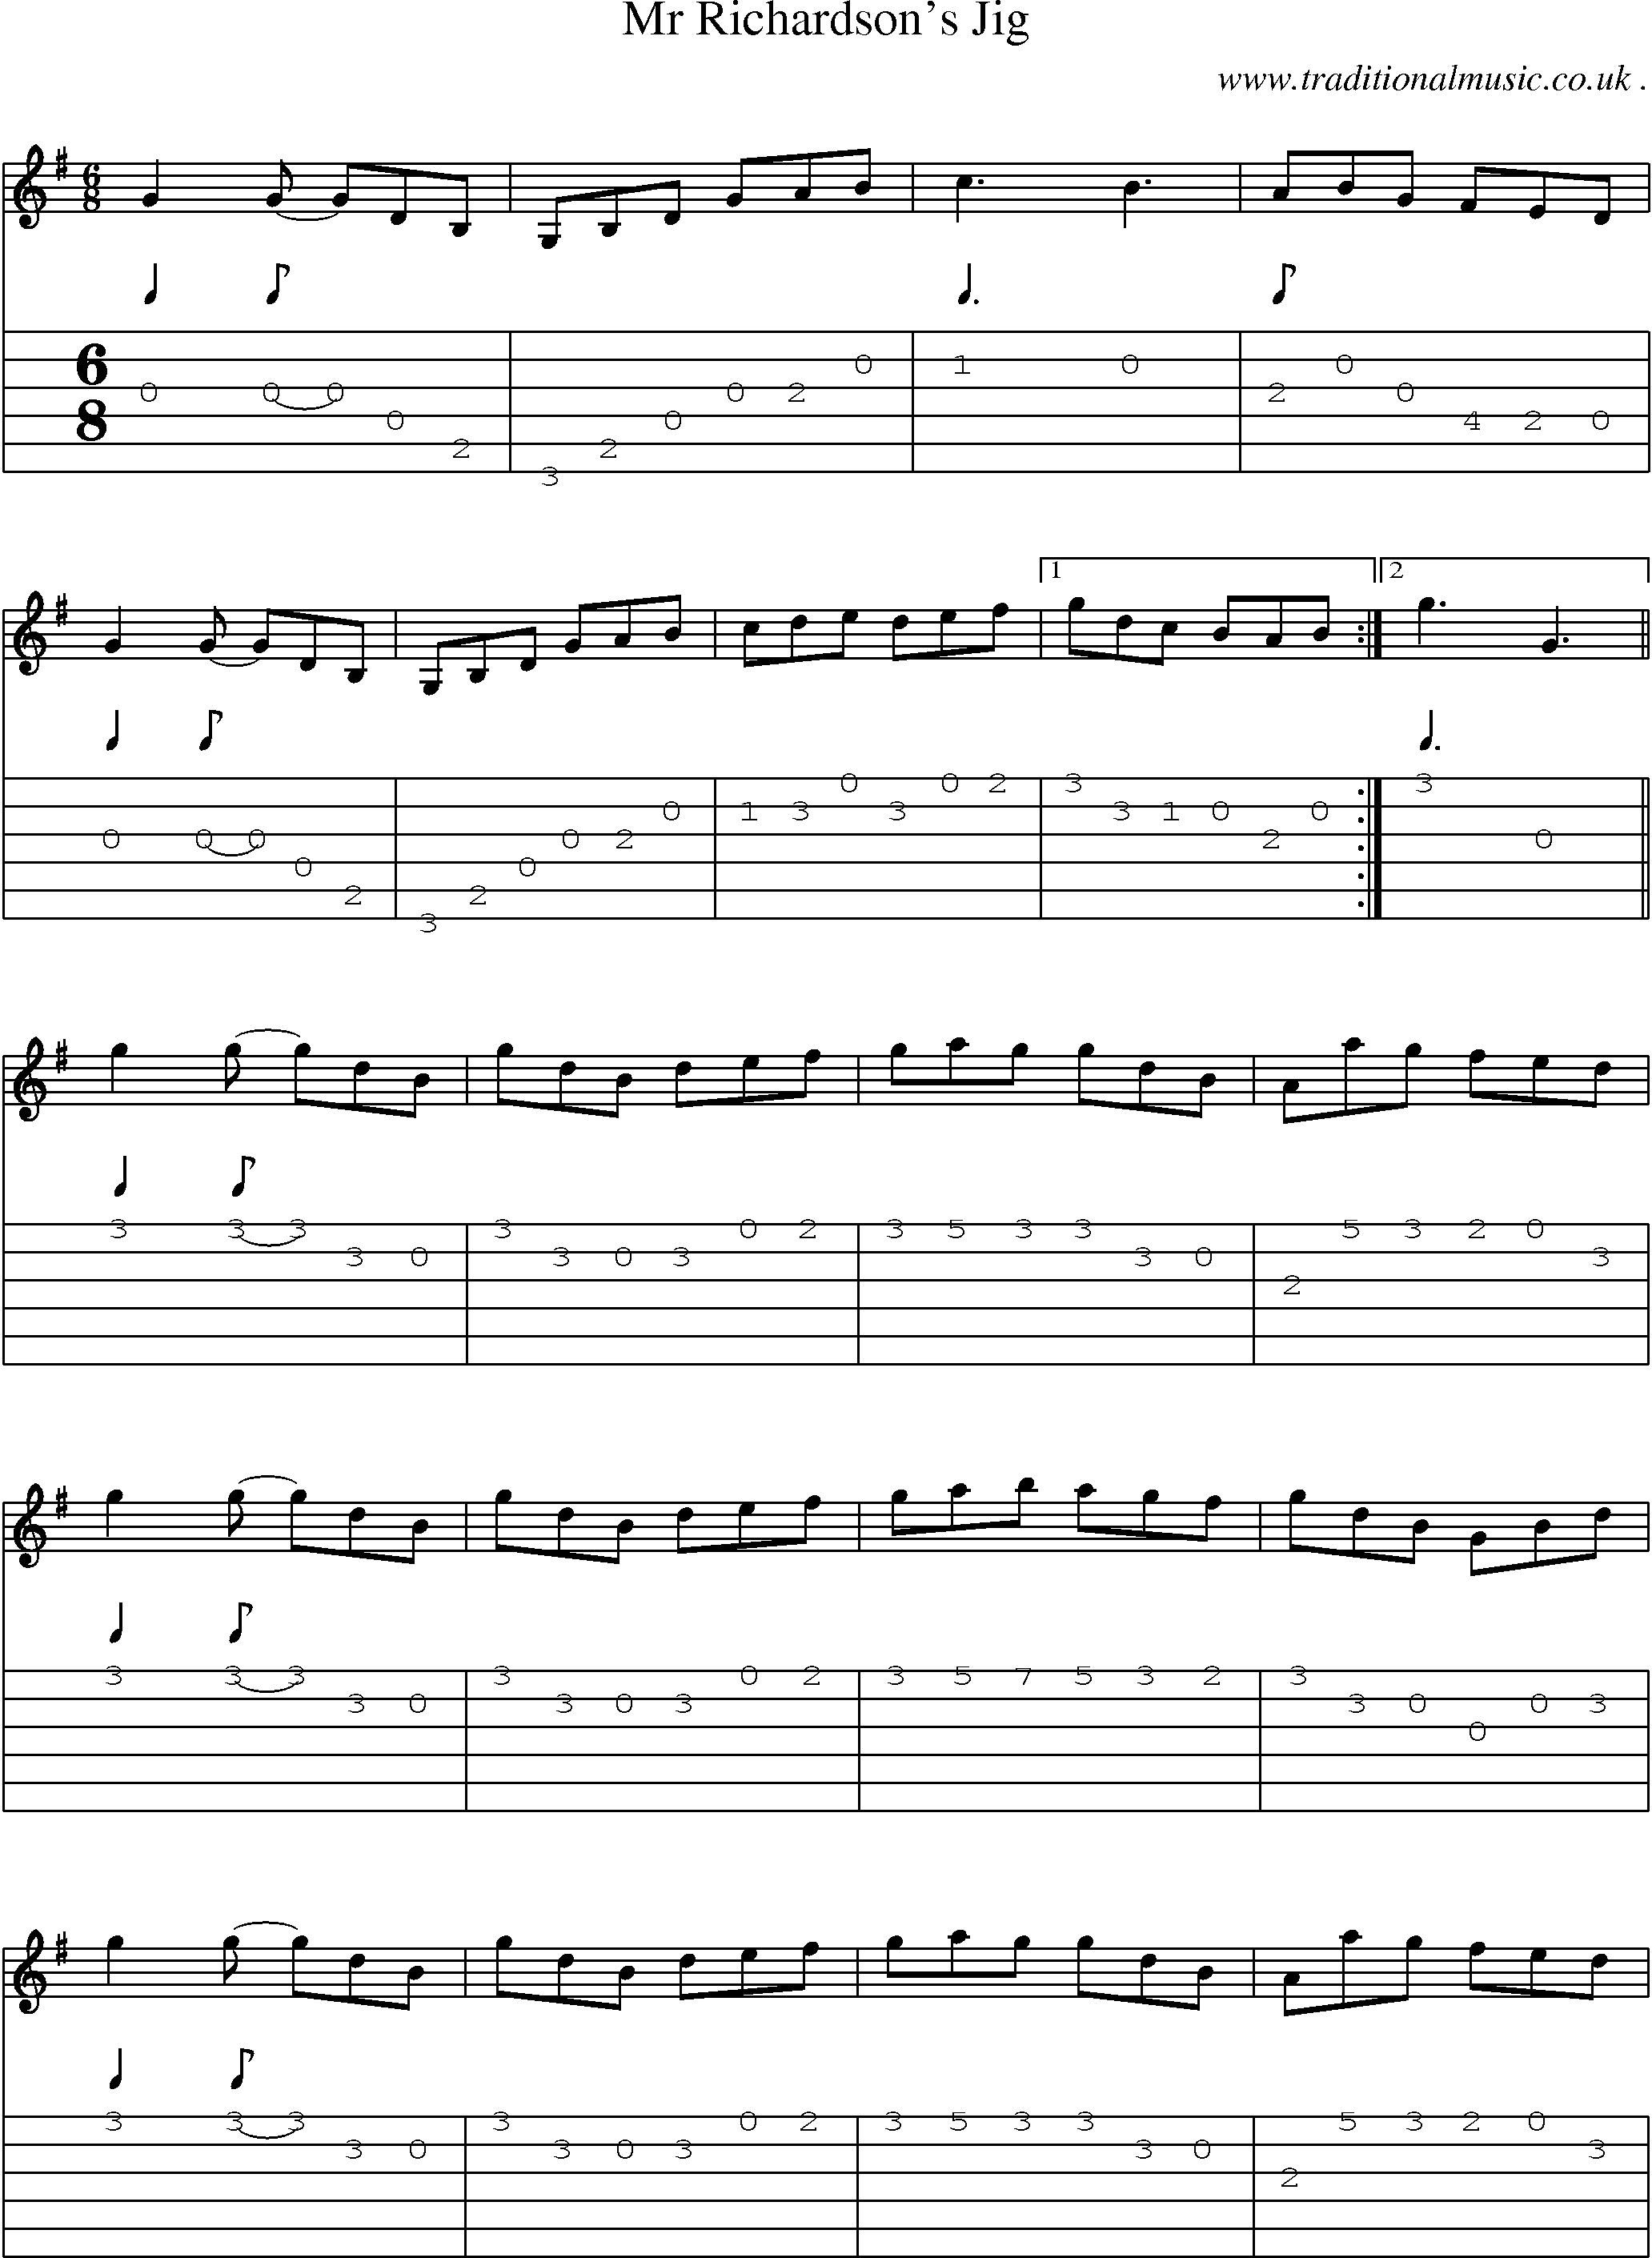 Sheet-Music and Guitar Tabs for Mr Richardsons Jig